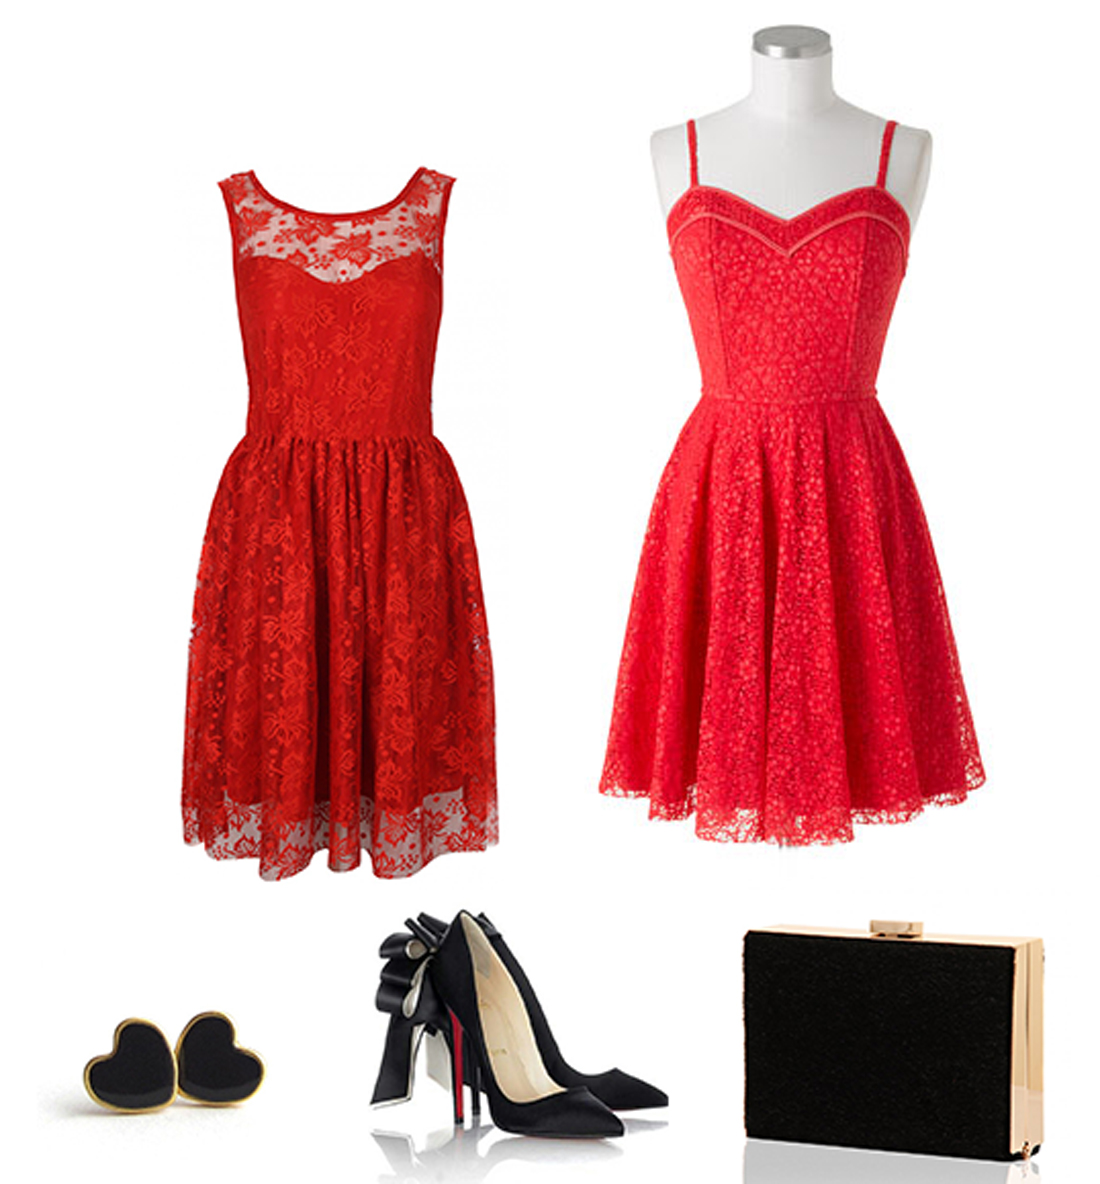 Valentines outfit ideas